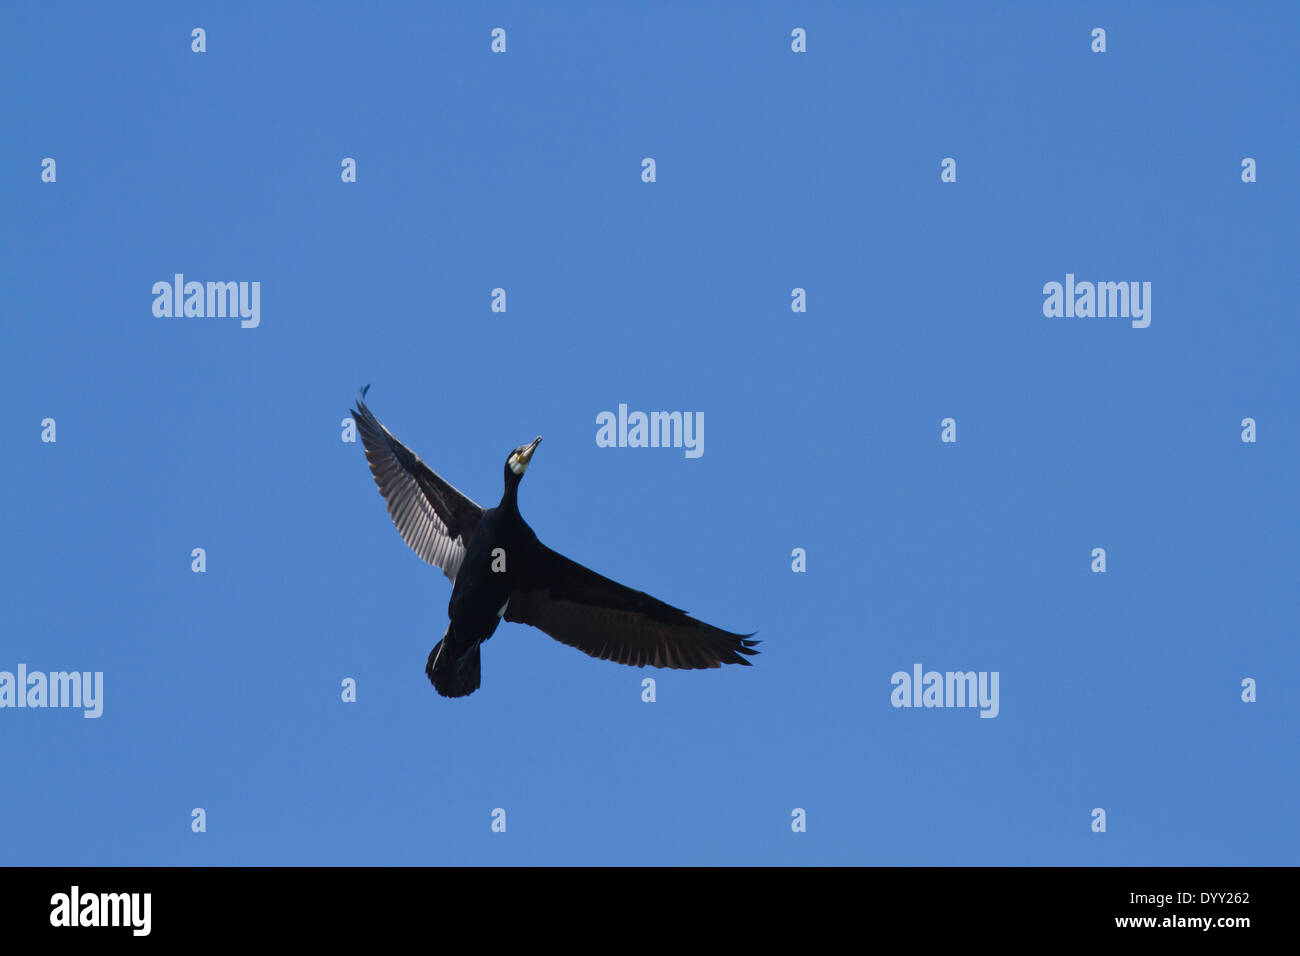 The Great Cormorant (Phalacrocorax carbo) flying on against a dark blue sky Stock Photo